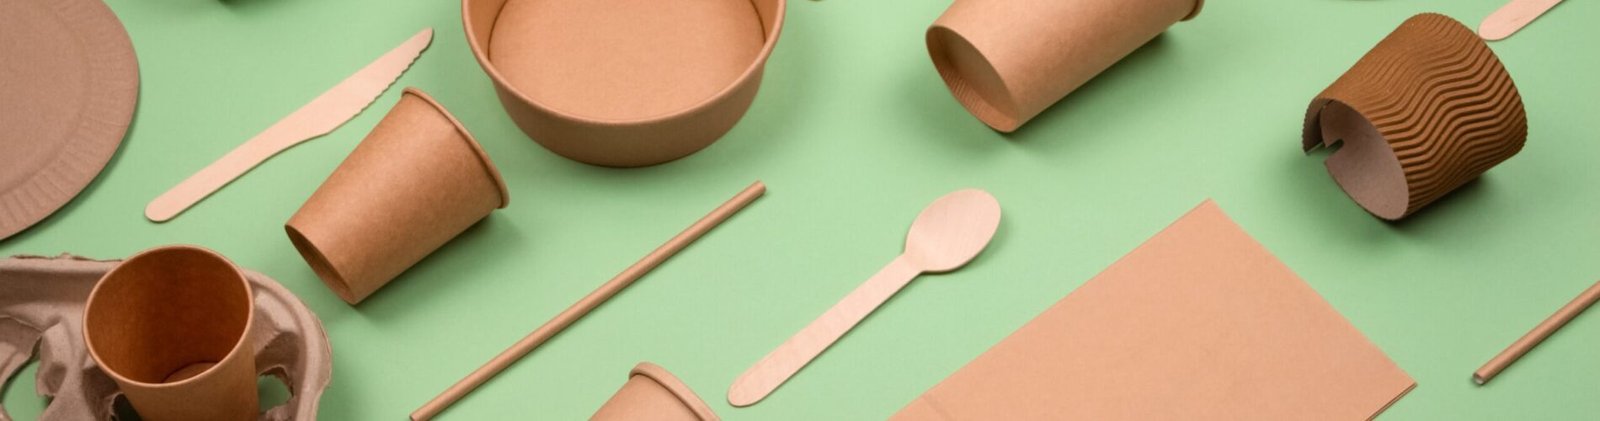 Set,Of,Different,Eco-friendly,Tableware,And,Kraft,Paper,Food,Packaging